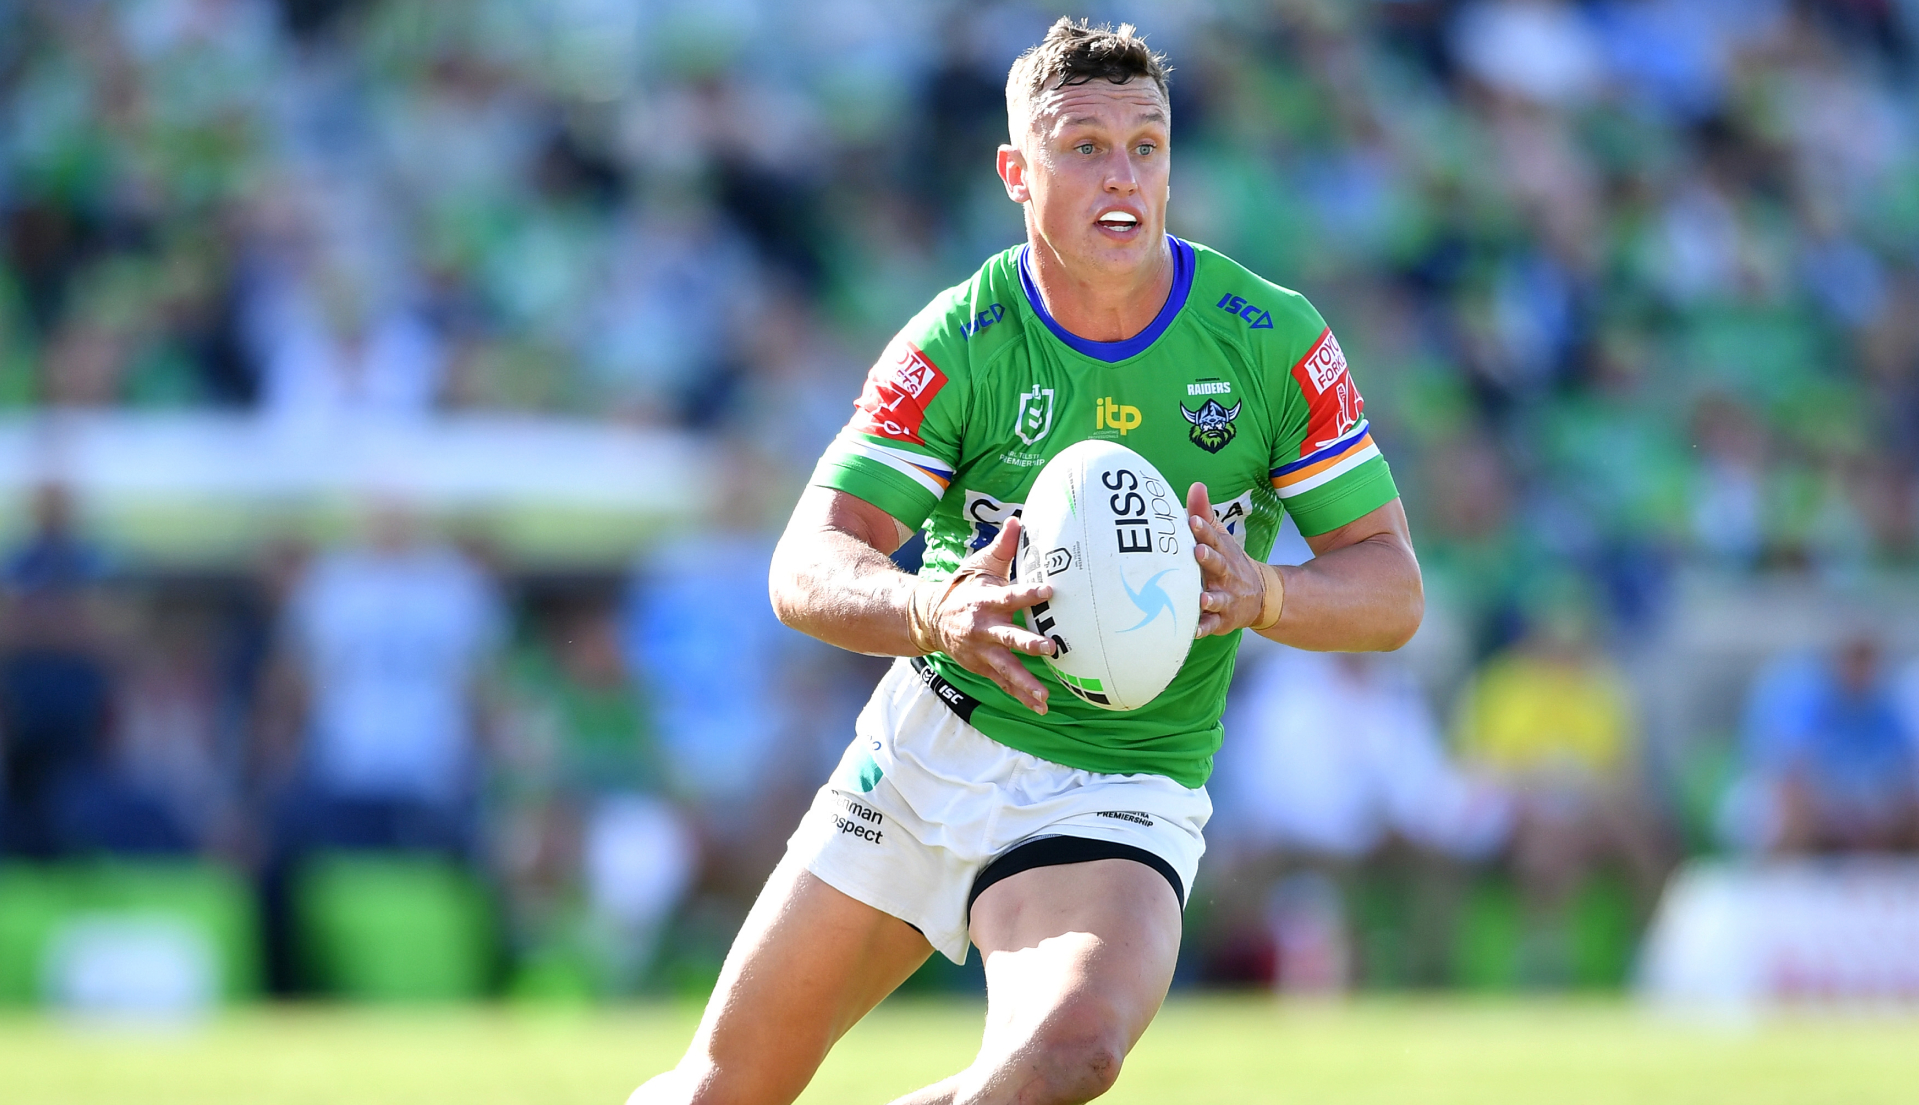 Canberra Raiders player running on field with football